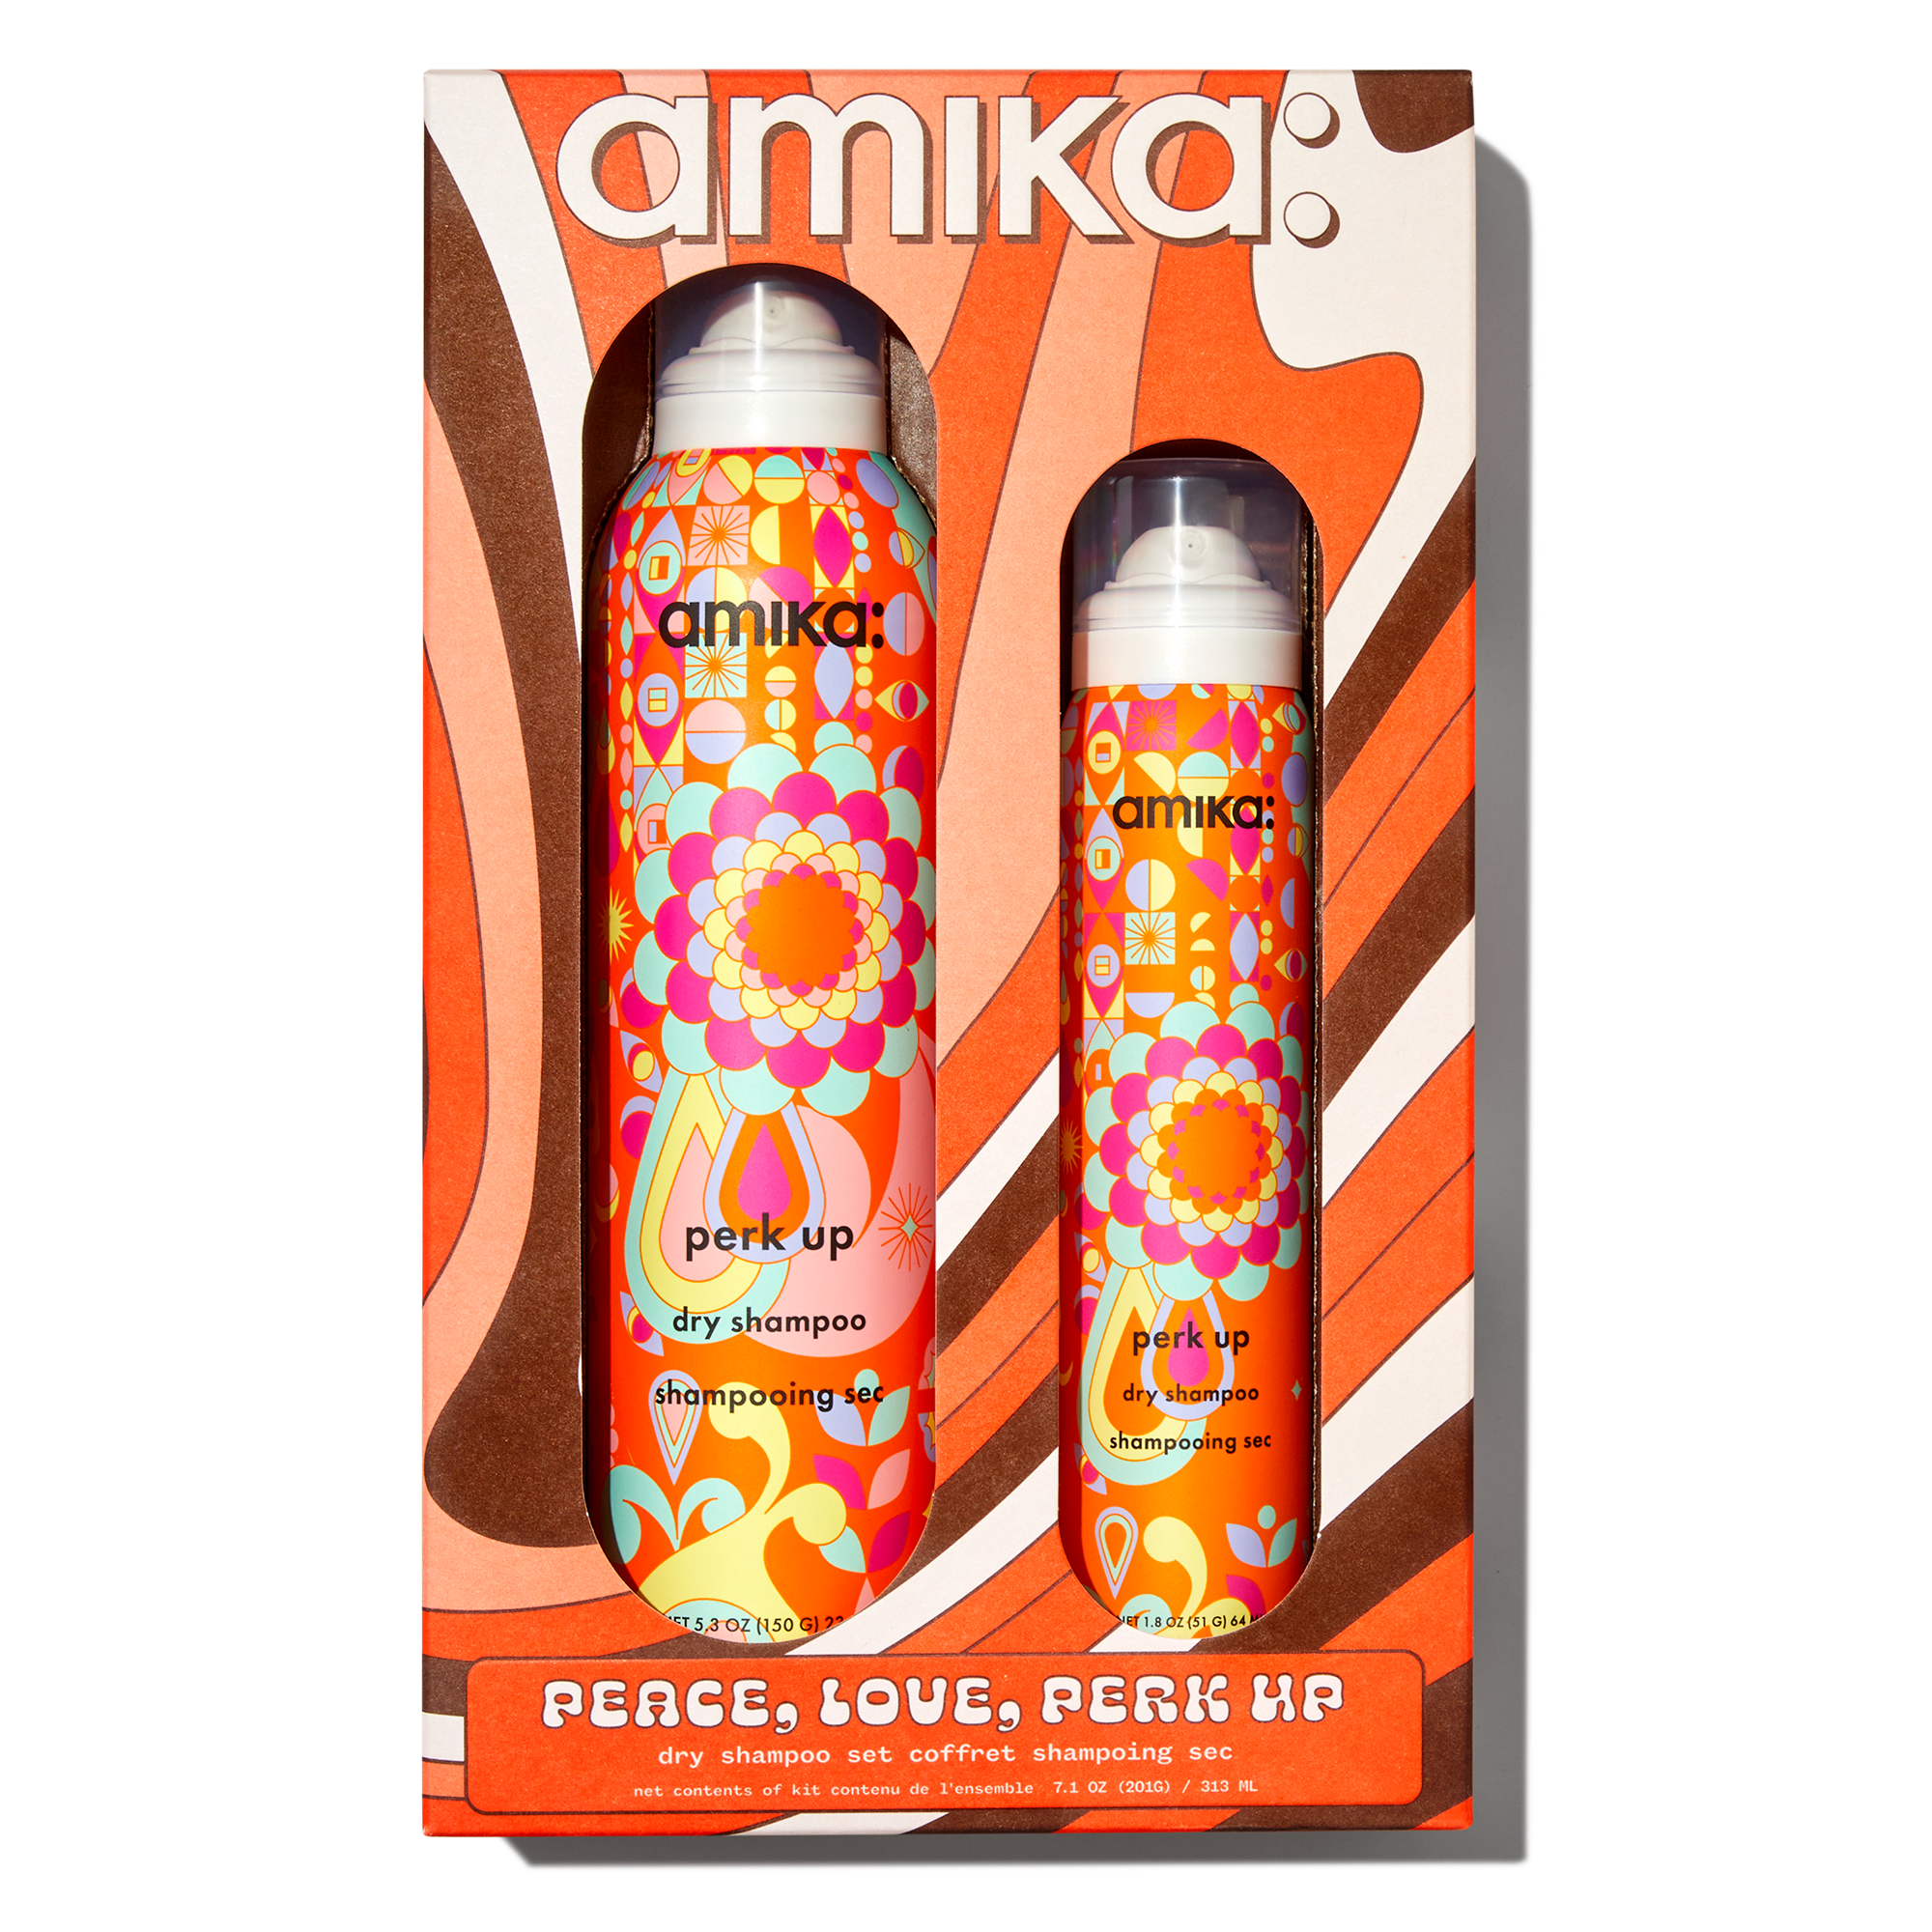 amika Perk Up Dry Shampoo for Any Hair Color from Dark Brunette to Light Blonde Talc and Aluminum Free No White Residue No Sulfates Parabens or Phthalates Travel Size 1 oz